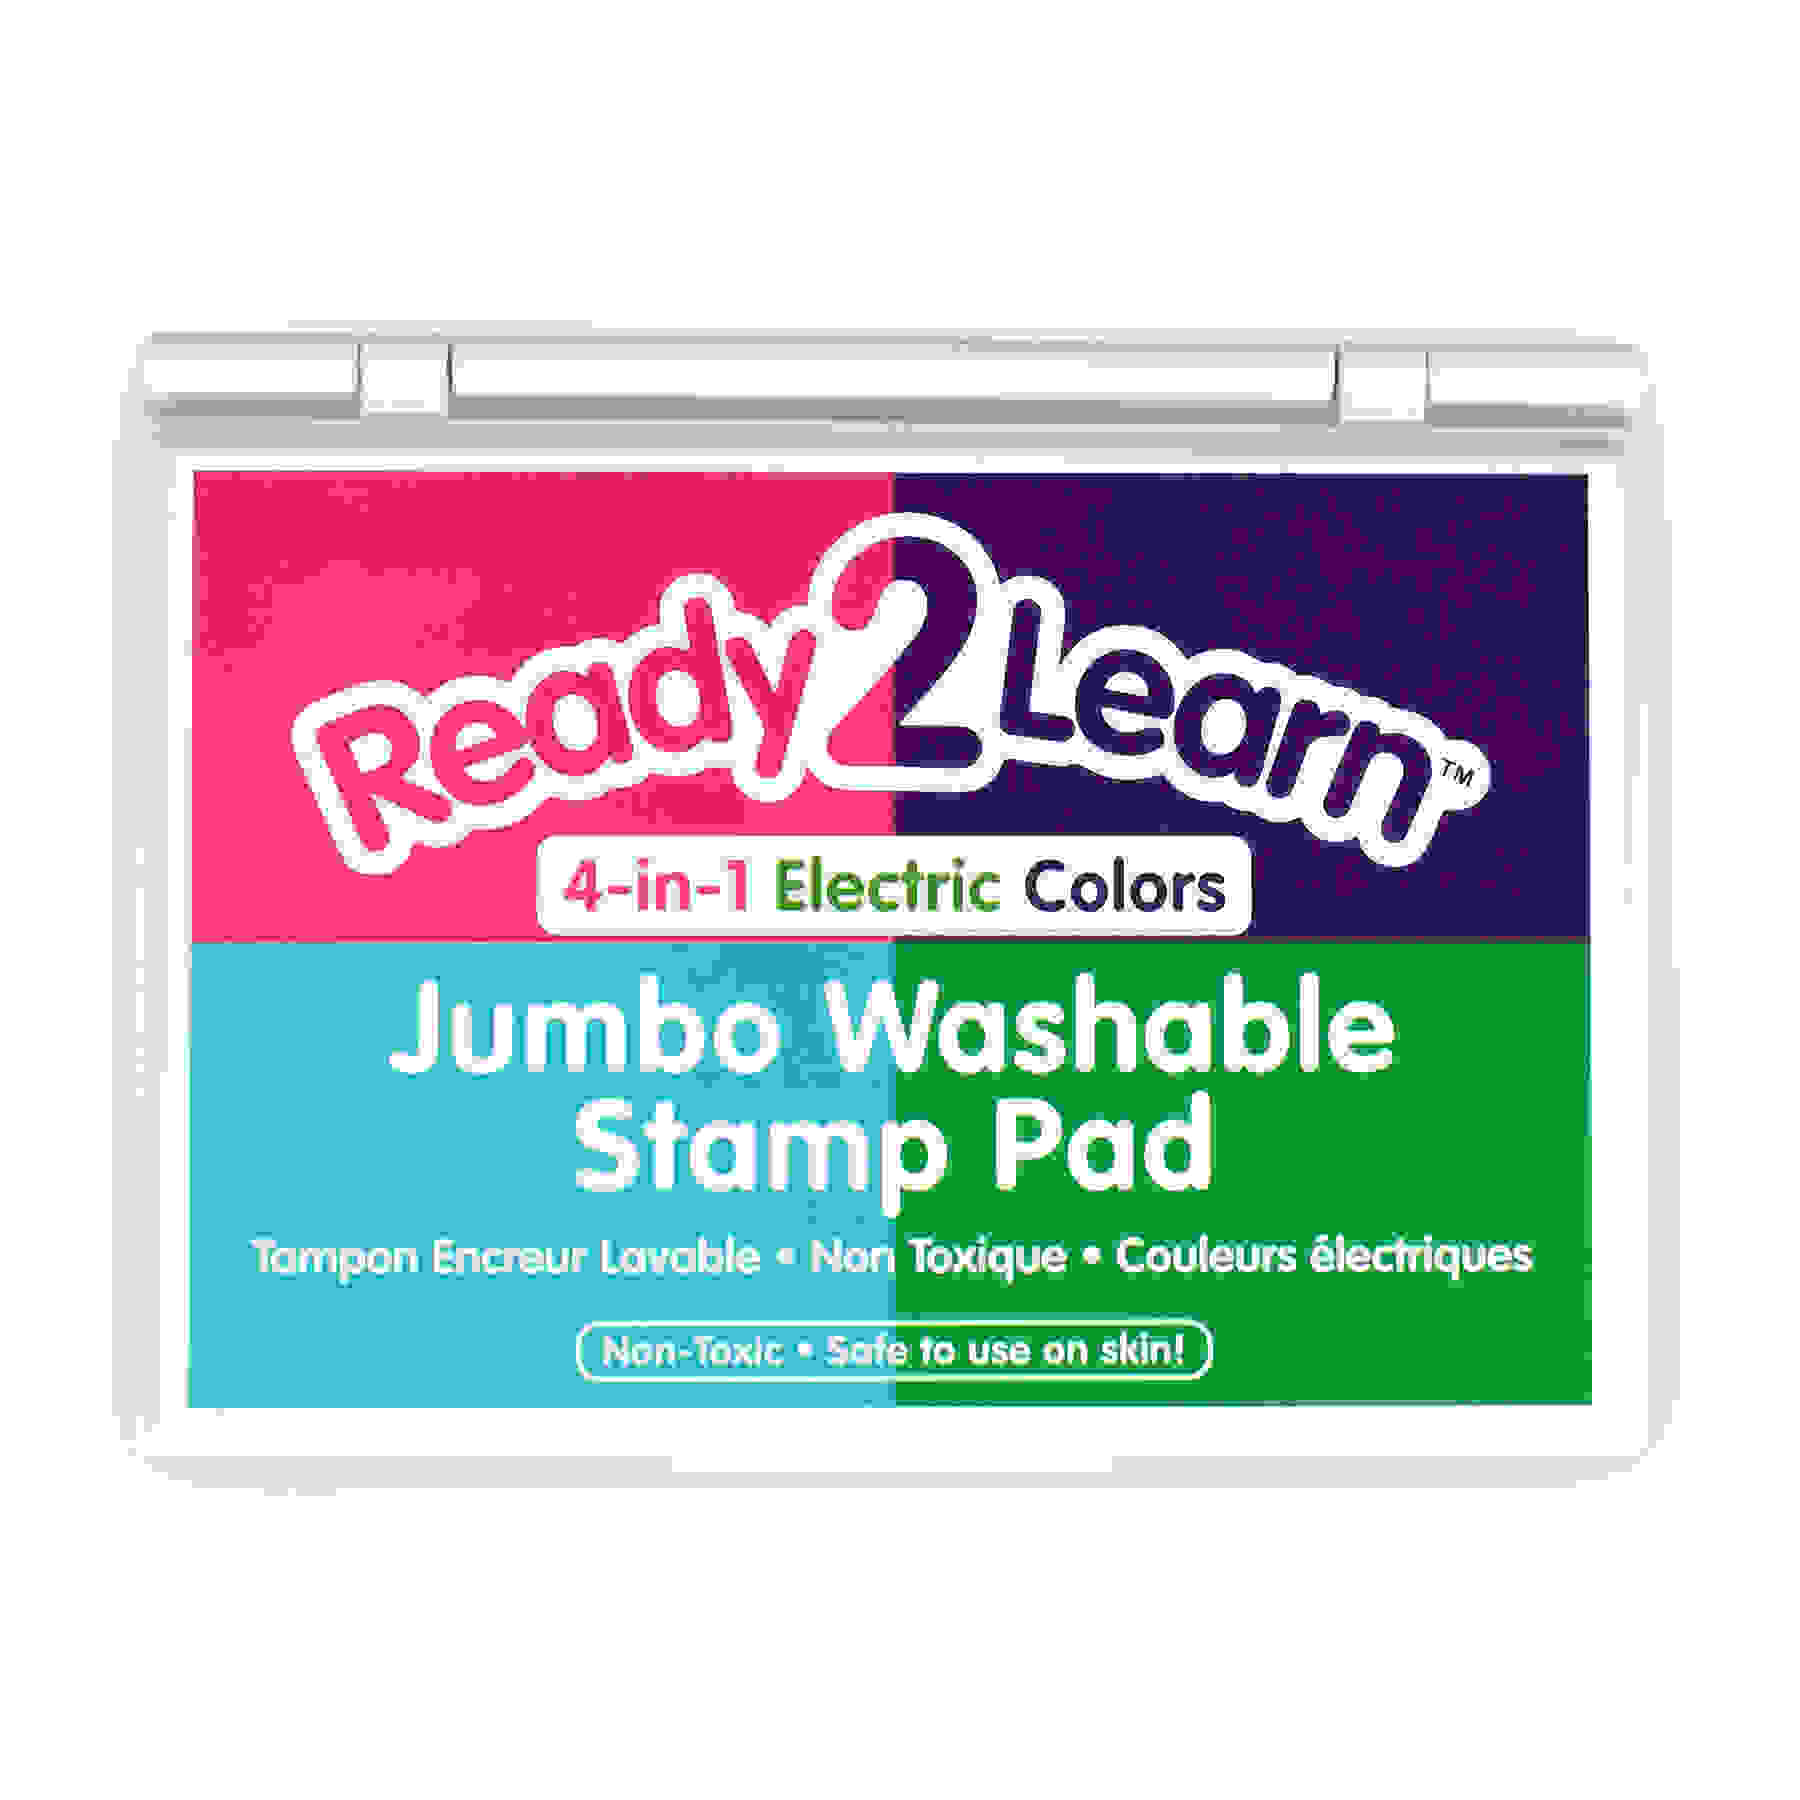 Jumbo Washable Stamp Pad - 4-in-1 Electric Colors